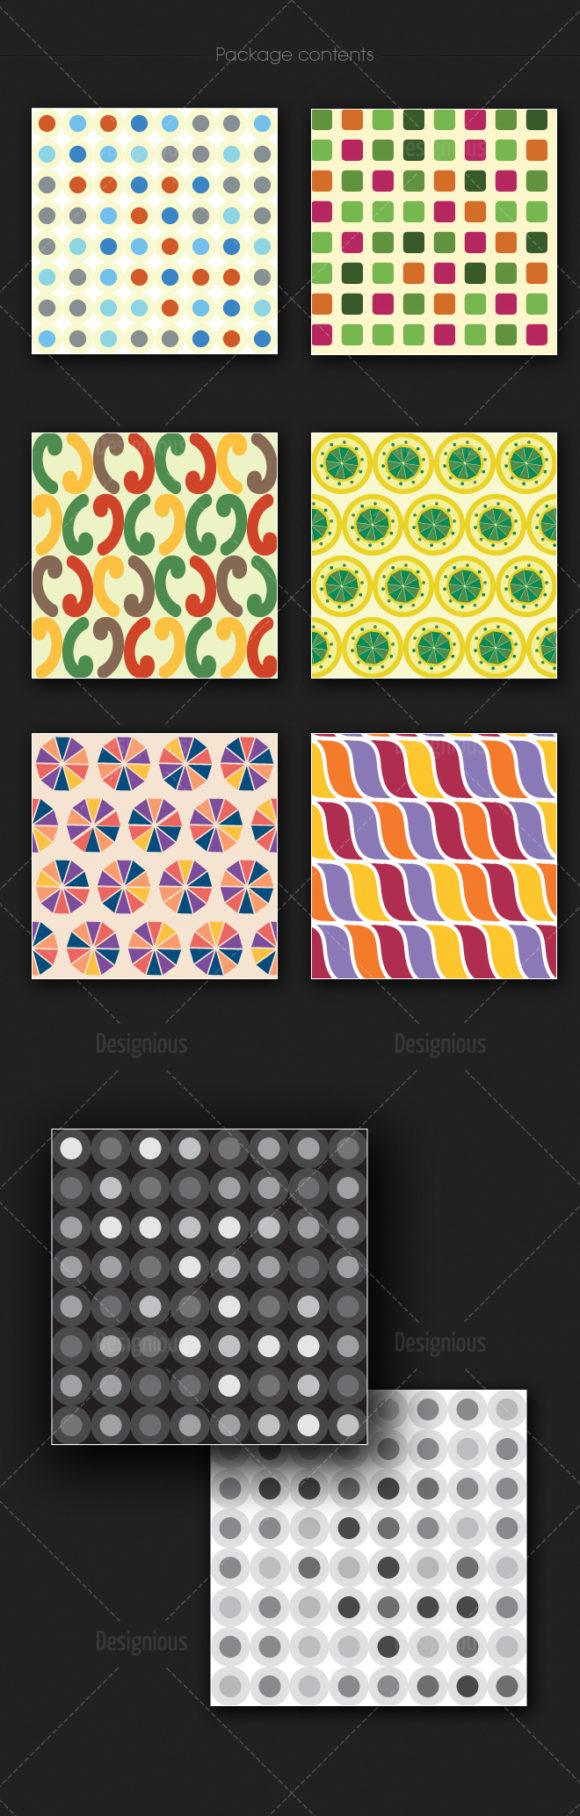 Seamless Patterns Vector Pack 181 2